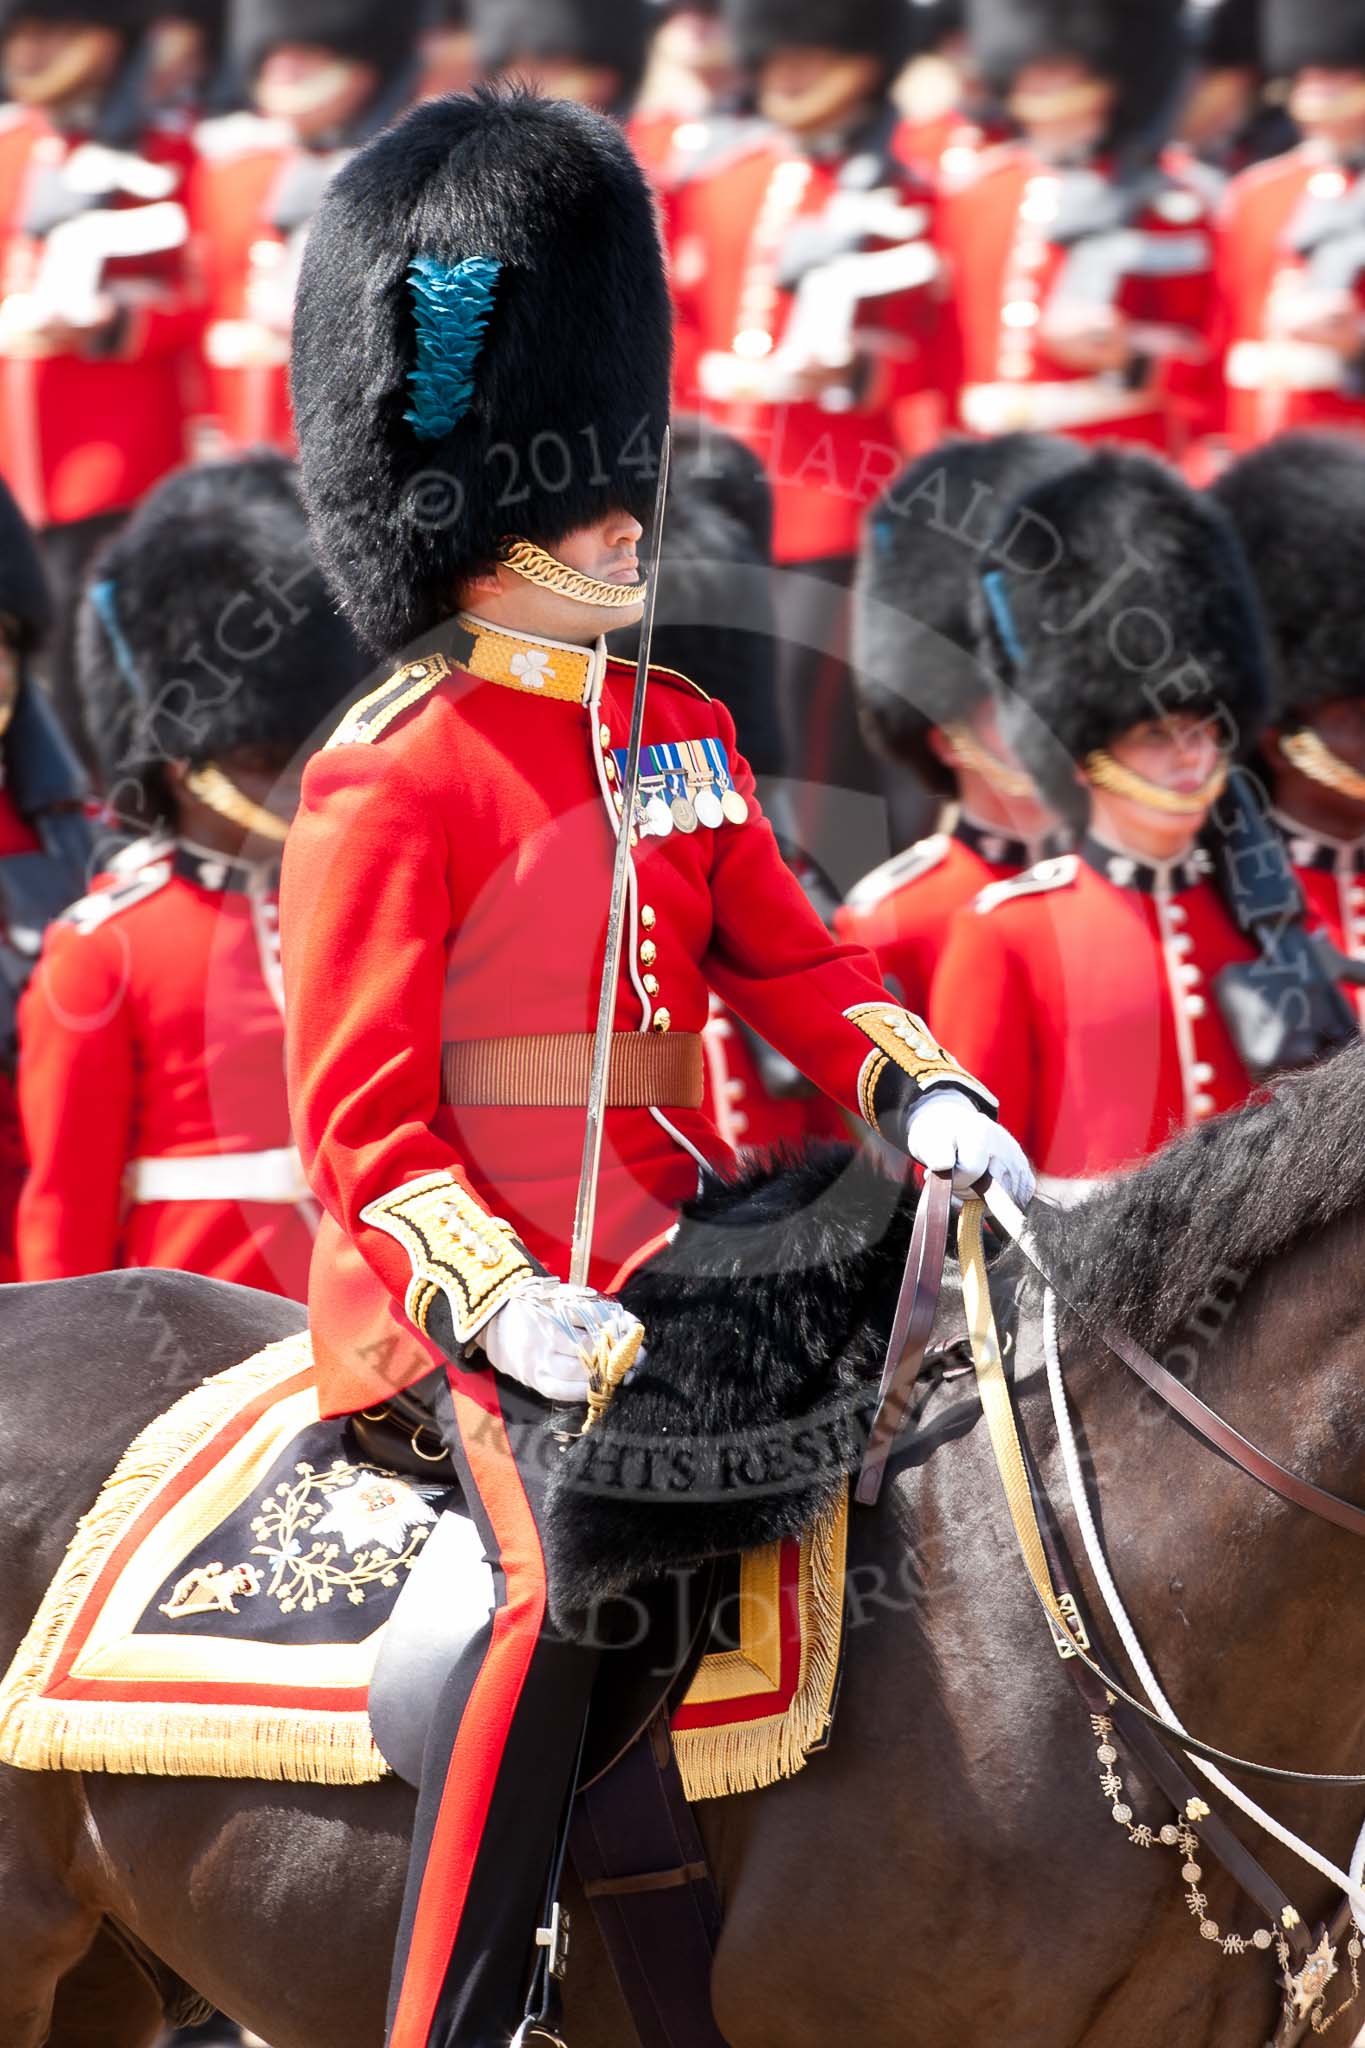 Trooping the Colour 2009: The Major of the Parade, Major F A D L Roberts, Irish Guards..
Horse Guards Parade, Westminster,
London SW1,

United Kingdom,
on 13 June 2009 at 11:35, image #207